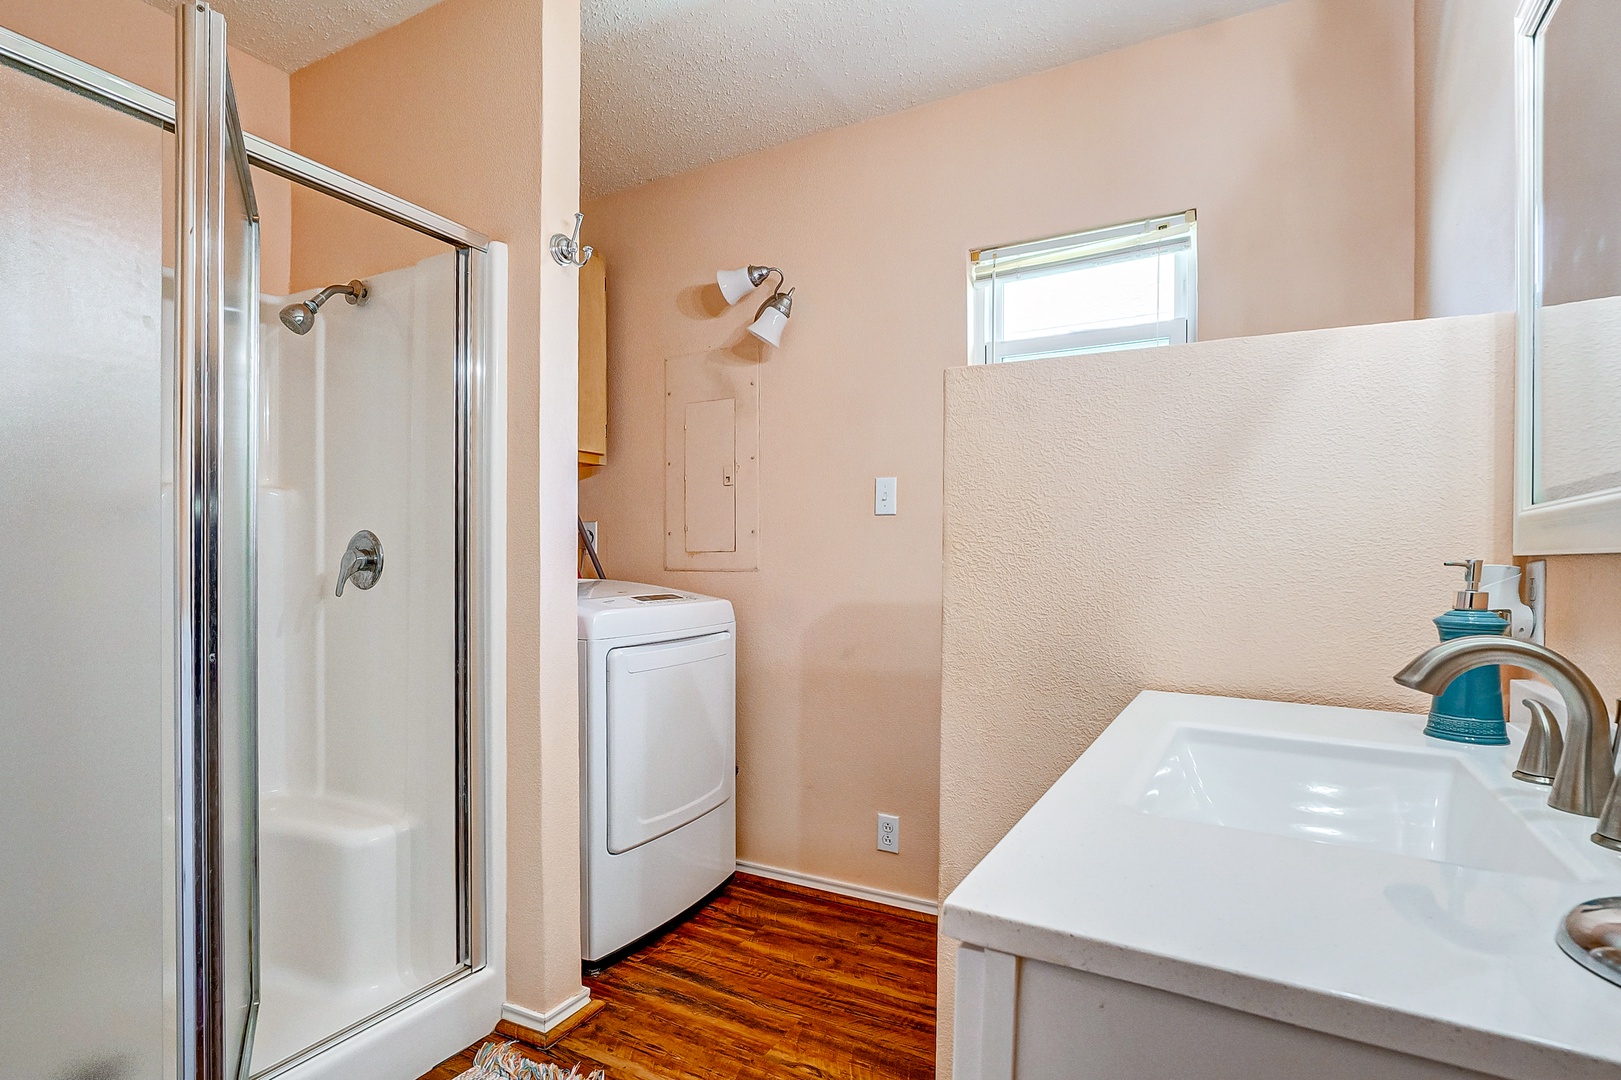 Guest bathroom / laundry room